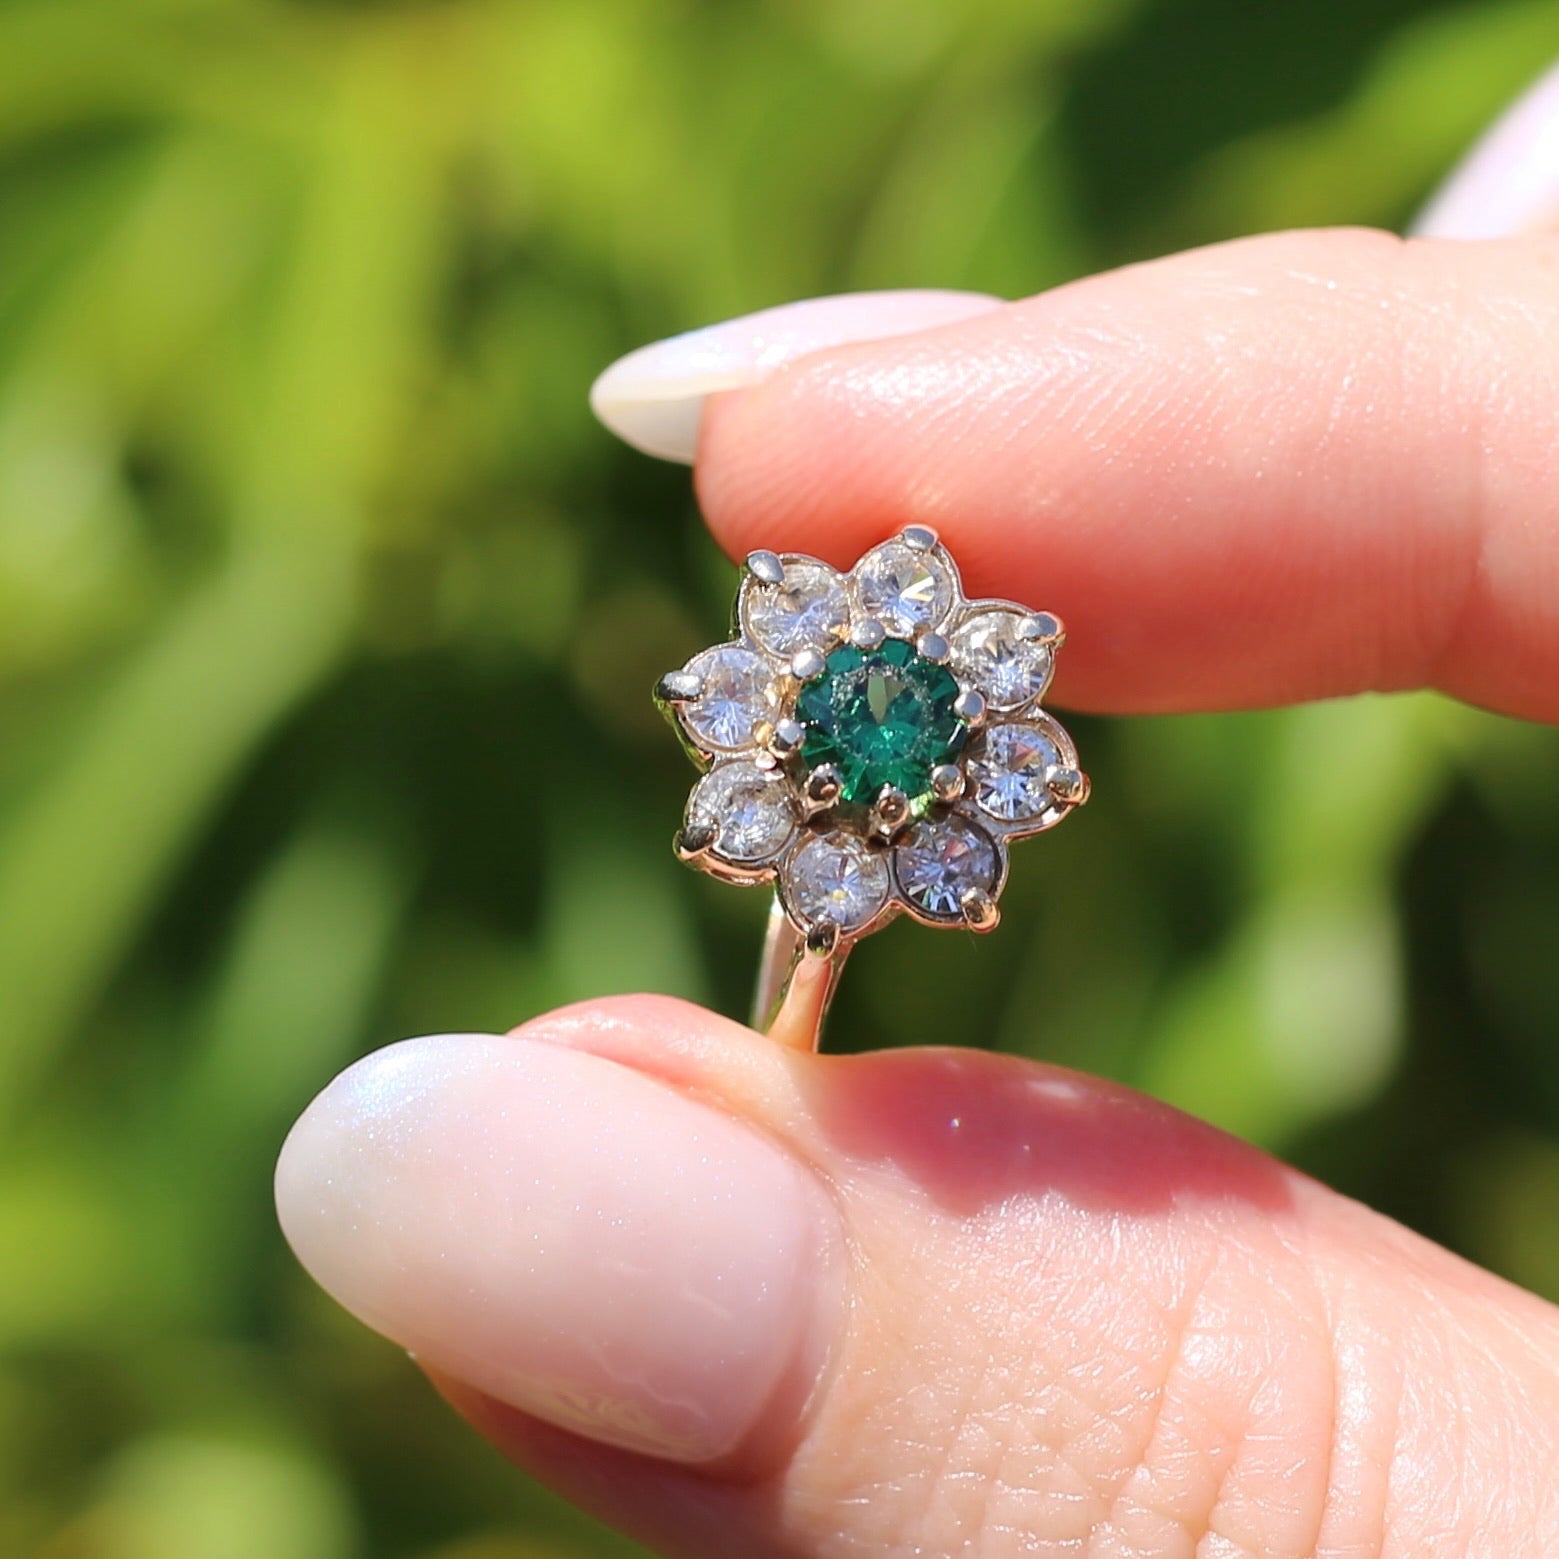 Vintage 1978 9ct Yellow Gold Emerald Green and White Spinel Daisy Cluster  Ring em 2023